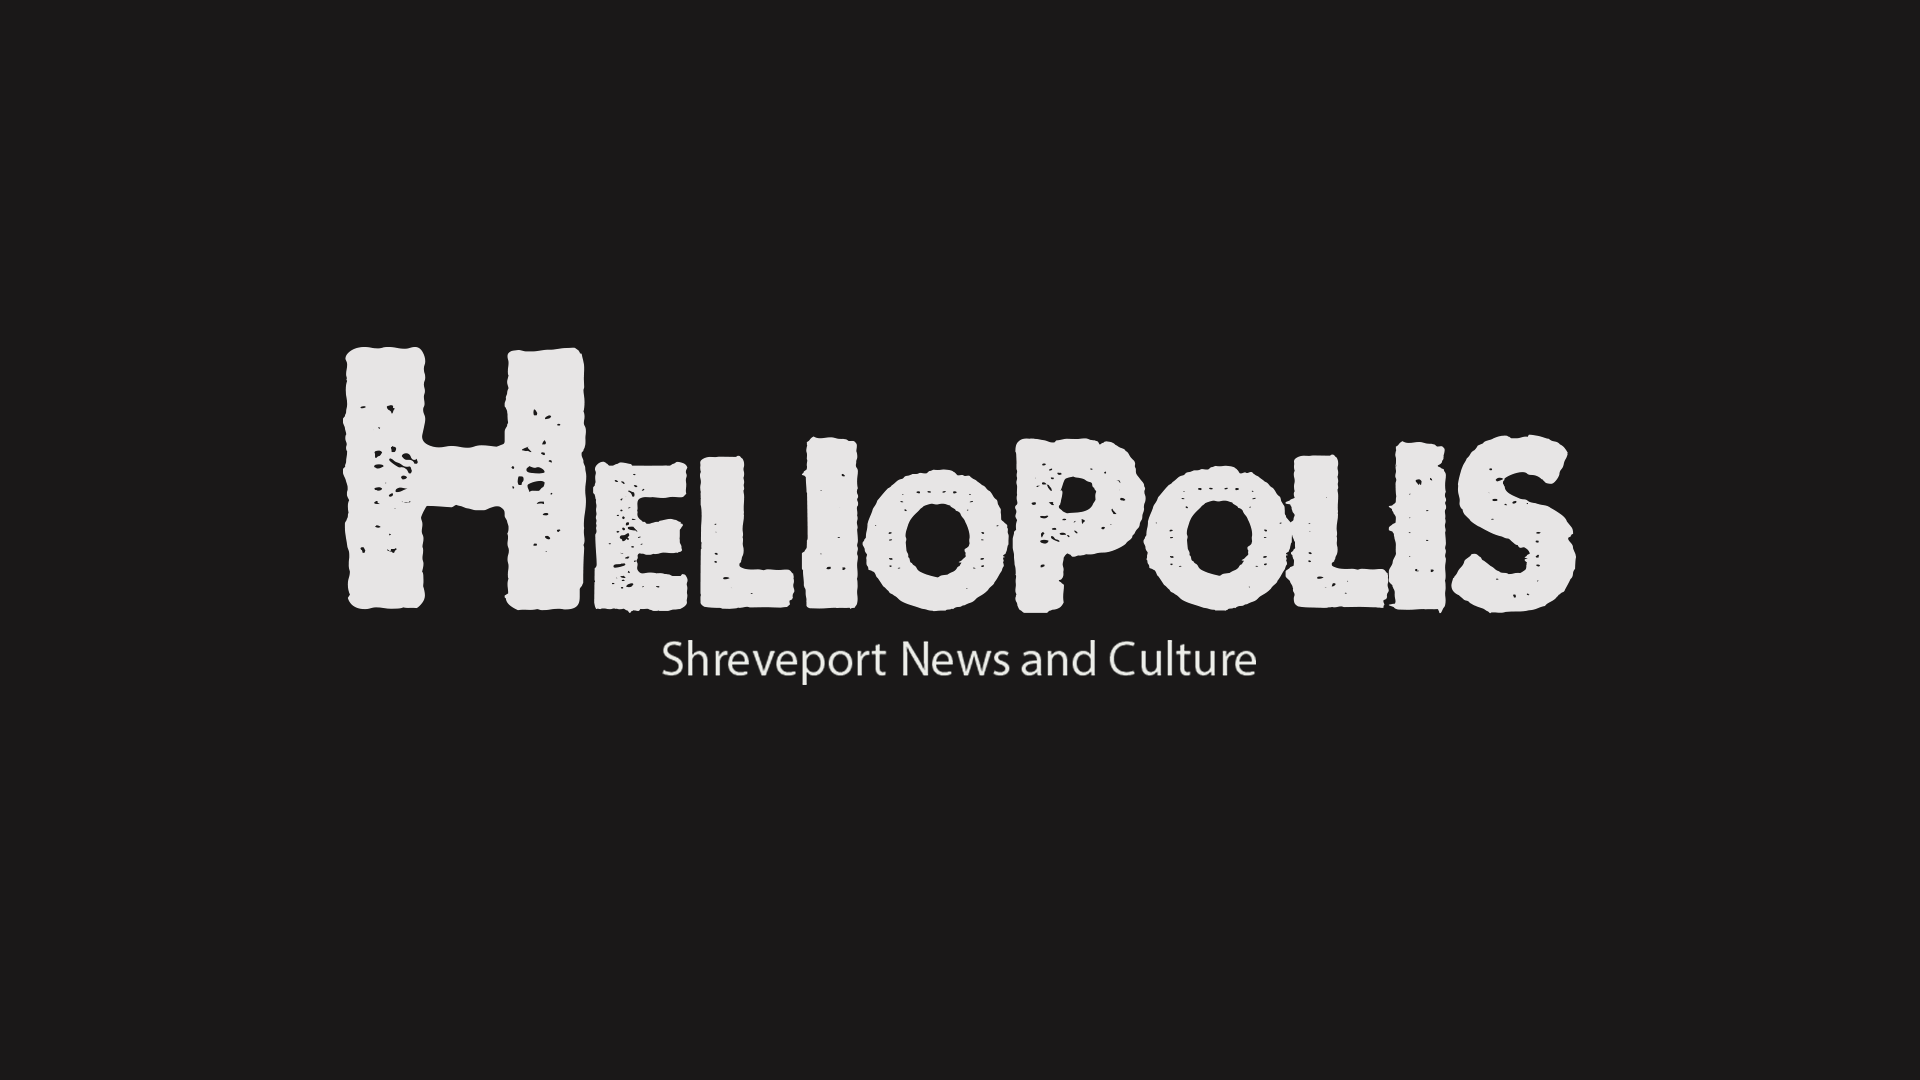 Heliopolis - Since 2016, I’ve written for and contributed to popular online magazine Heliopolis: Shreveport News & Culture, which is a grassroots organization dedicated to arts, culture, and civic engagement in Shreveport.